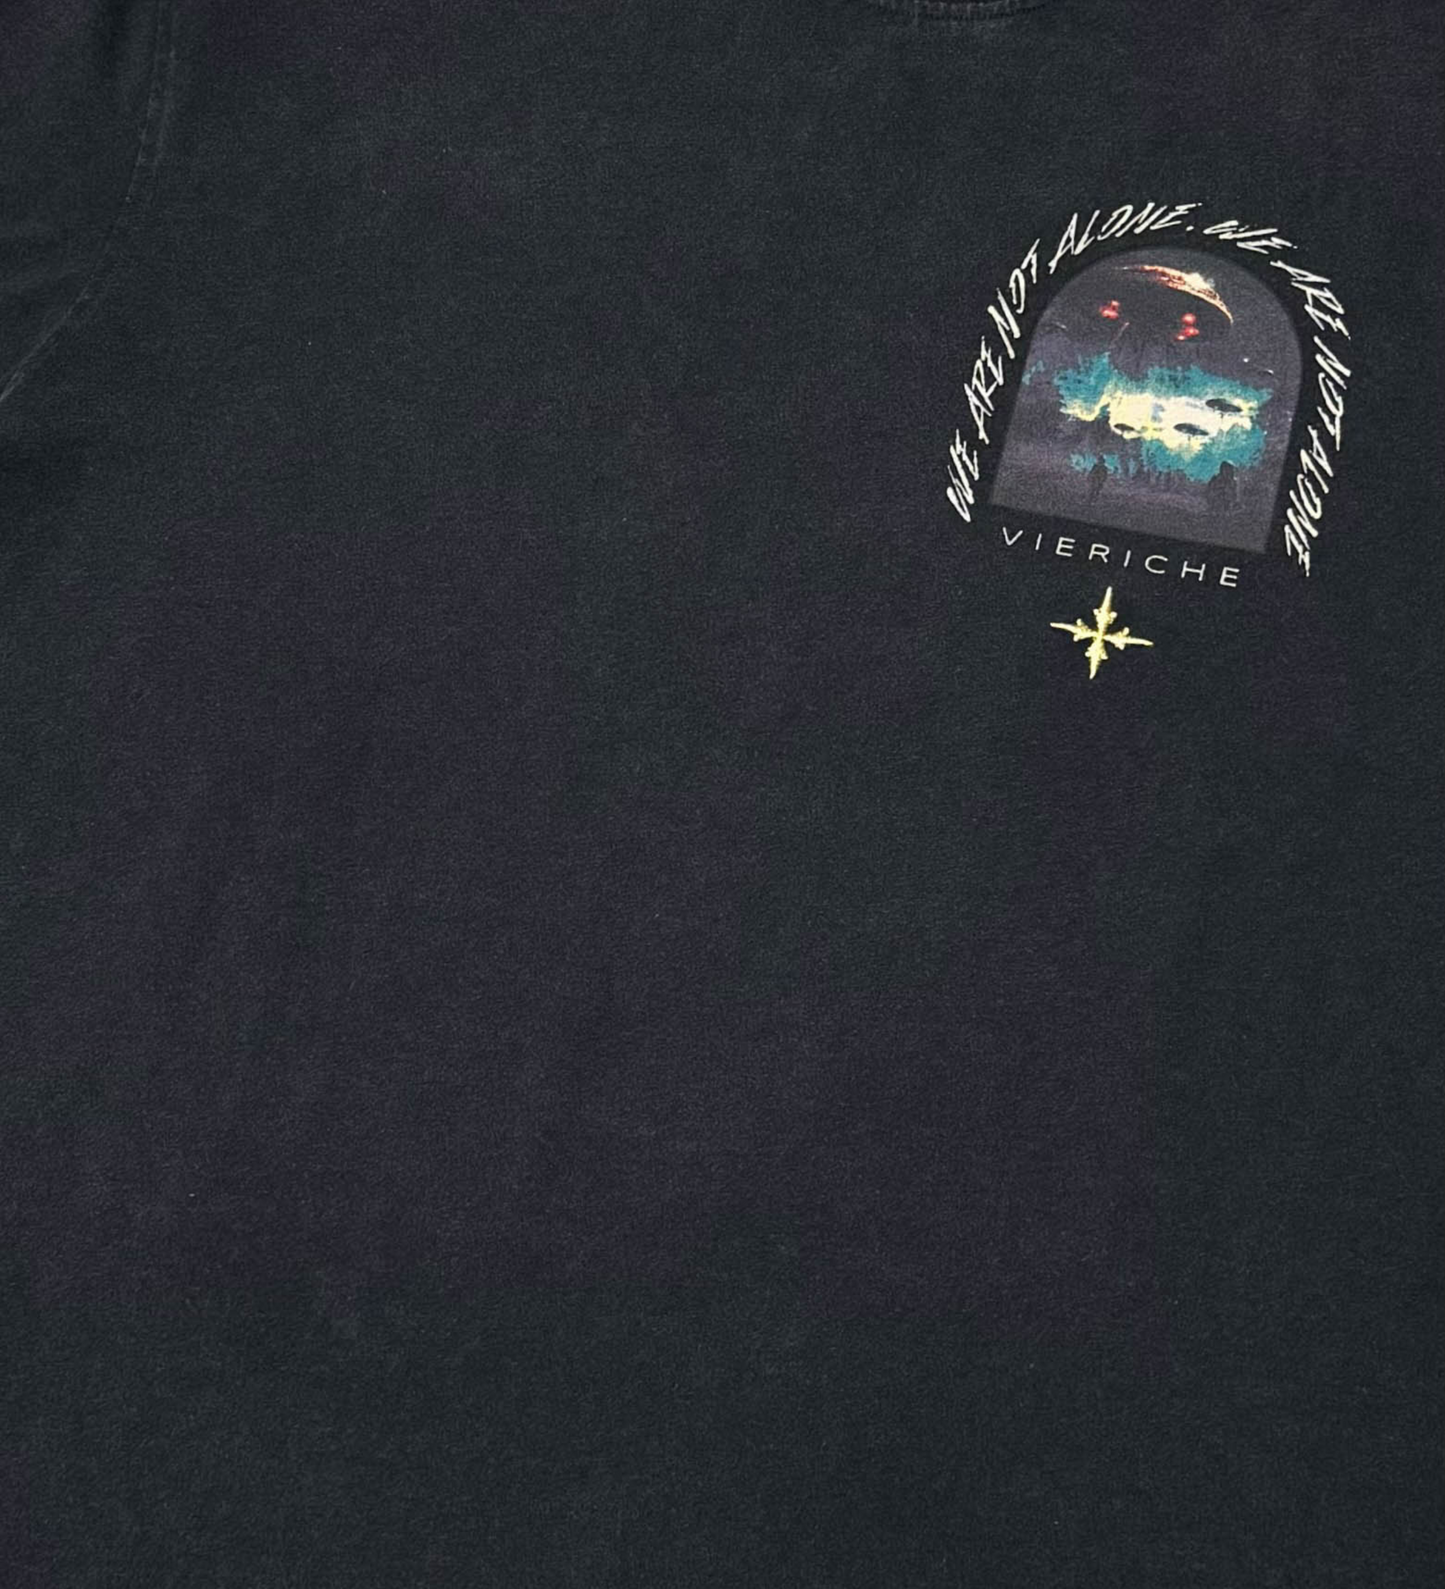 Abduction Tee